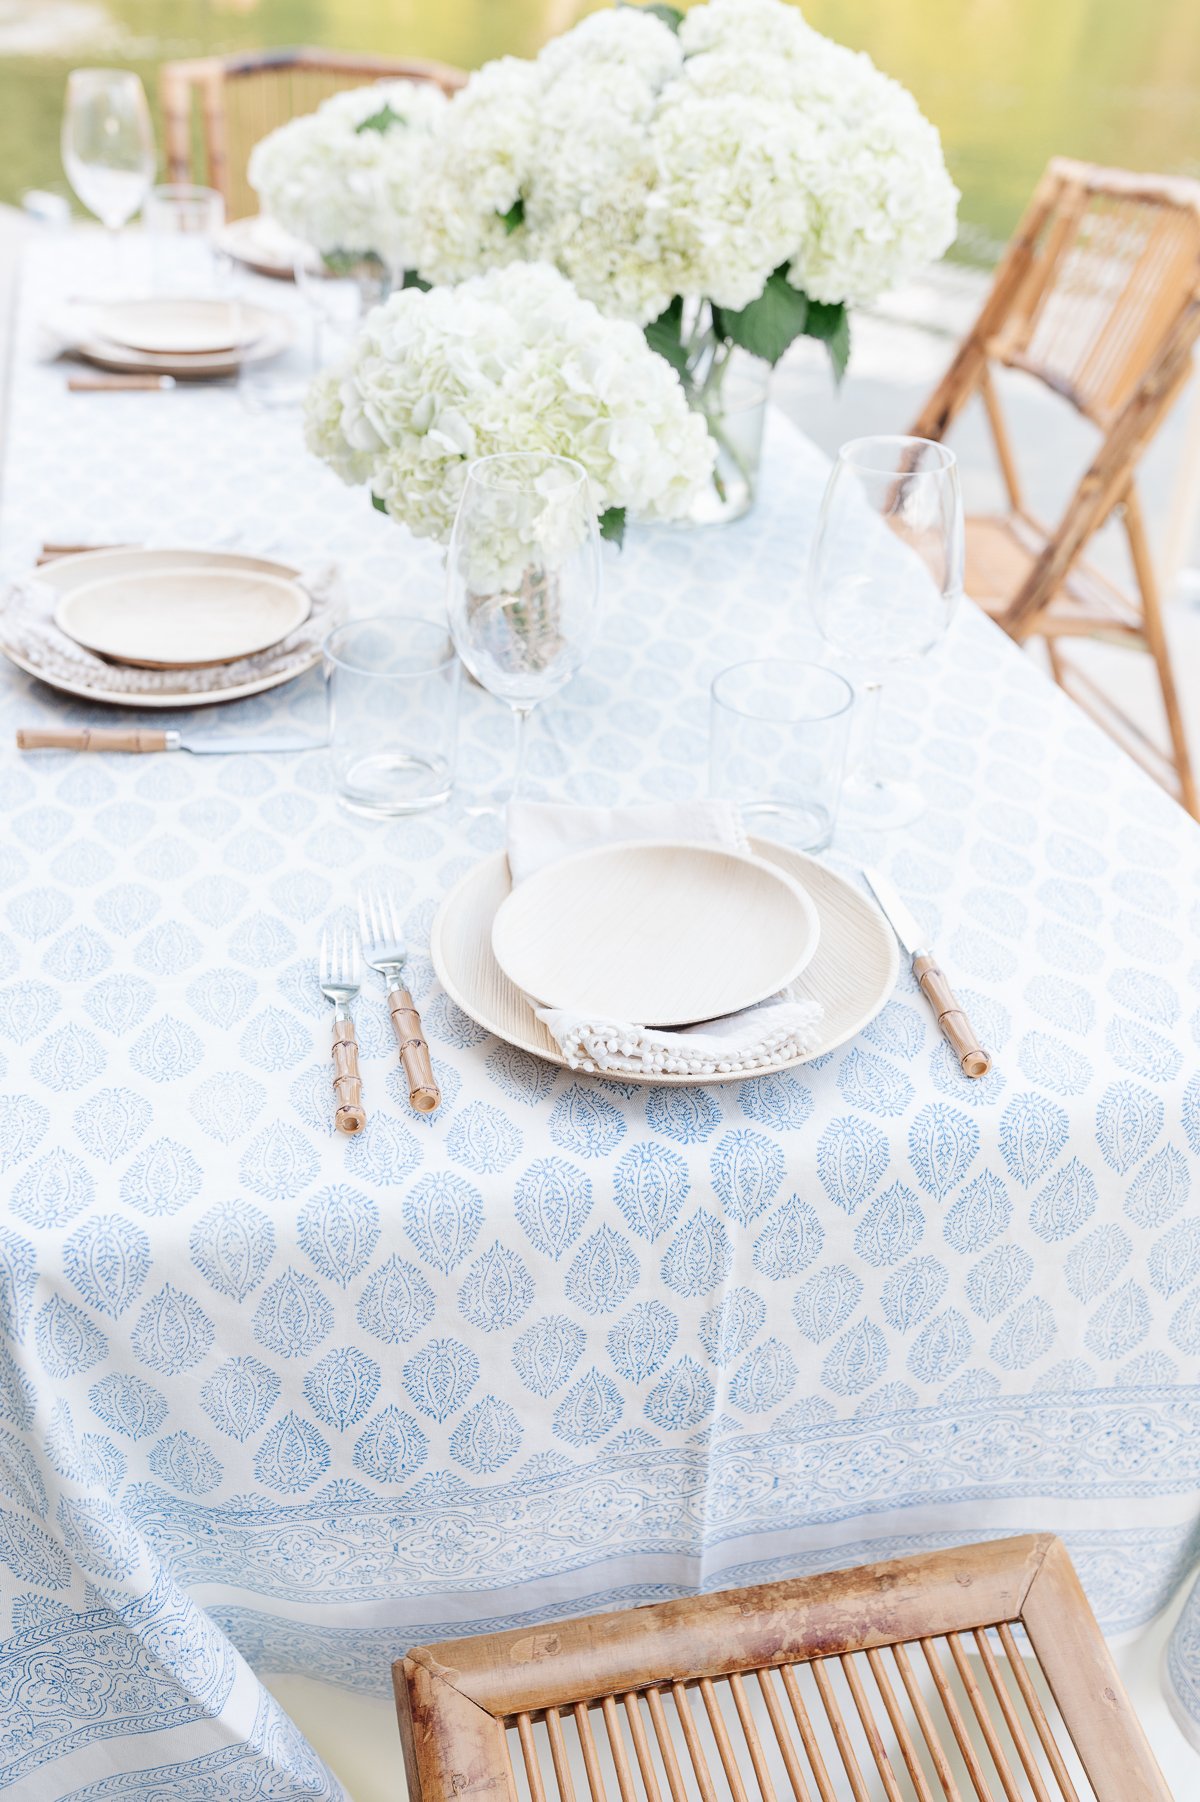 A block print tablecloth in blue and white.